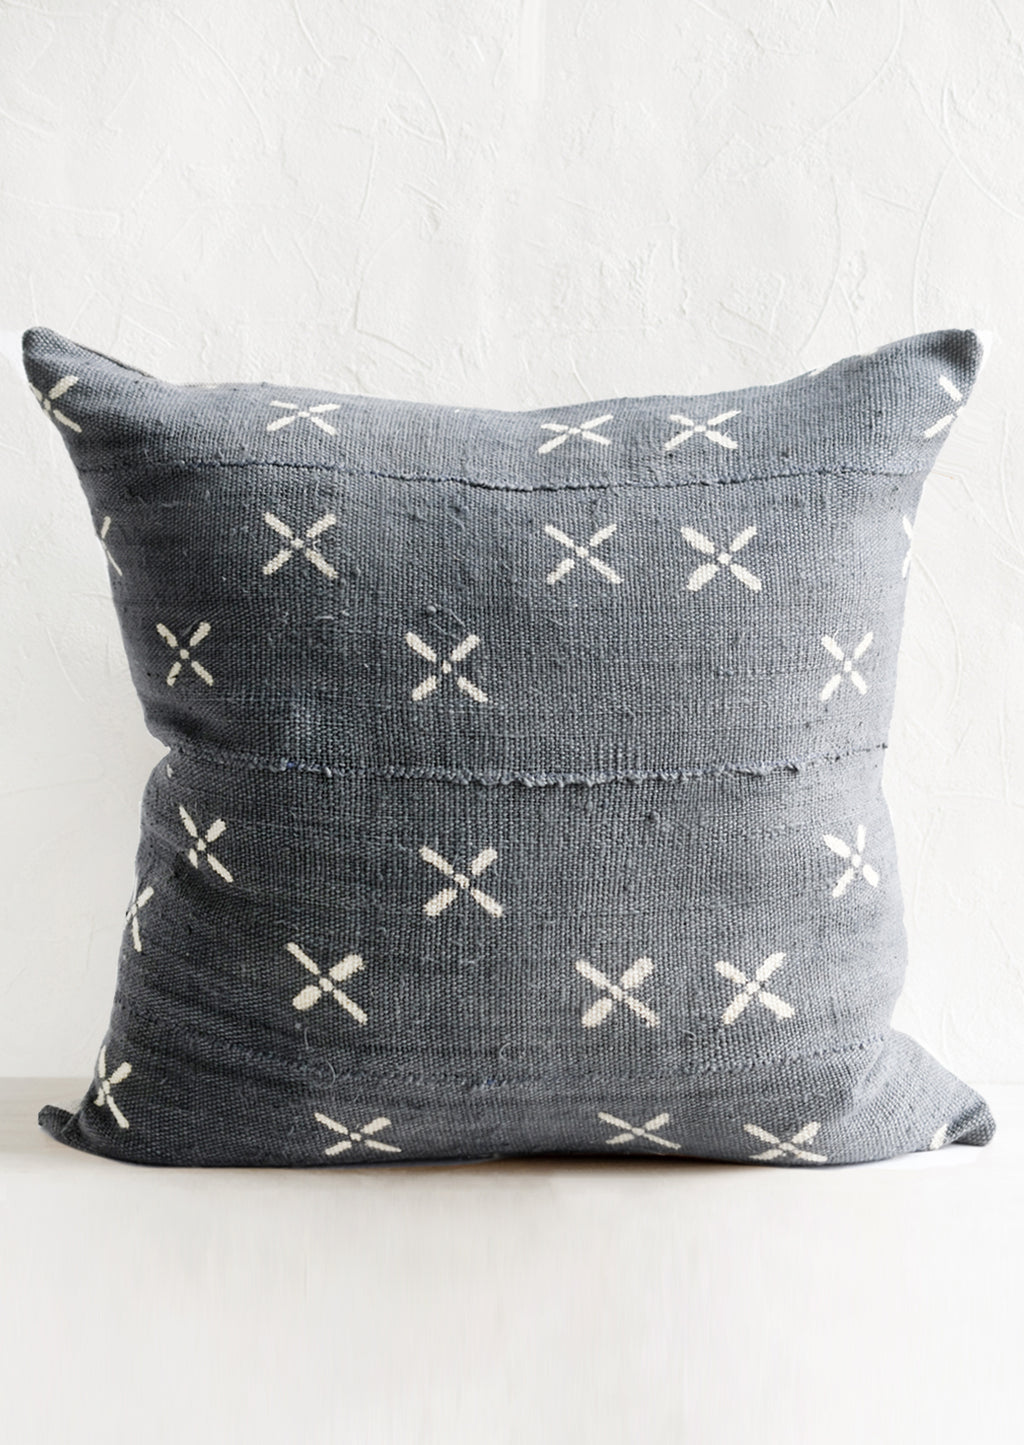 1: A dusty blue mudcloth pillow with white X pattern.